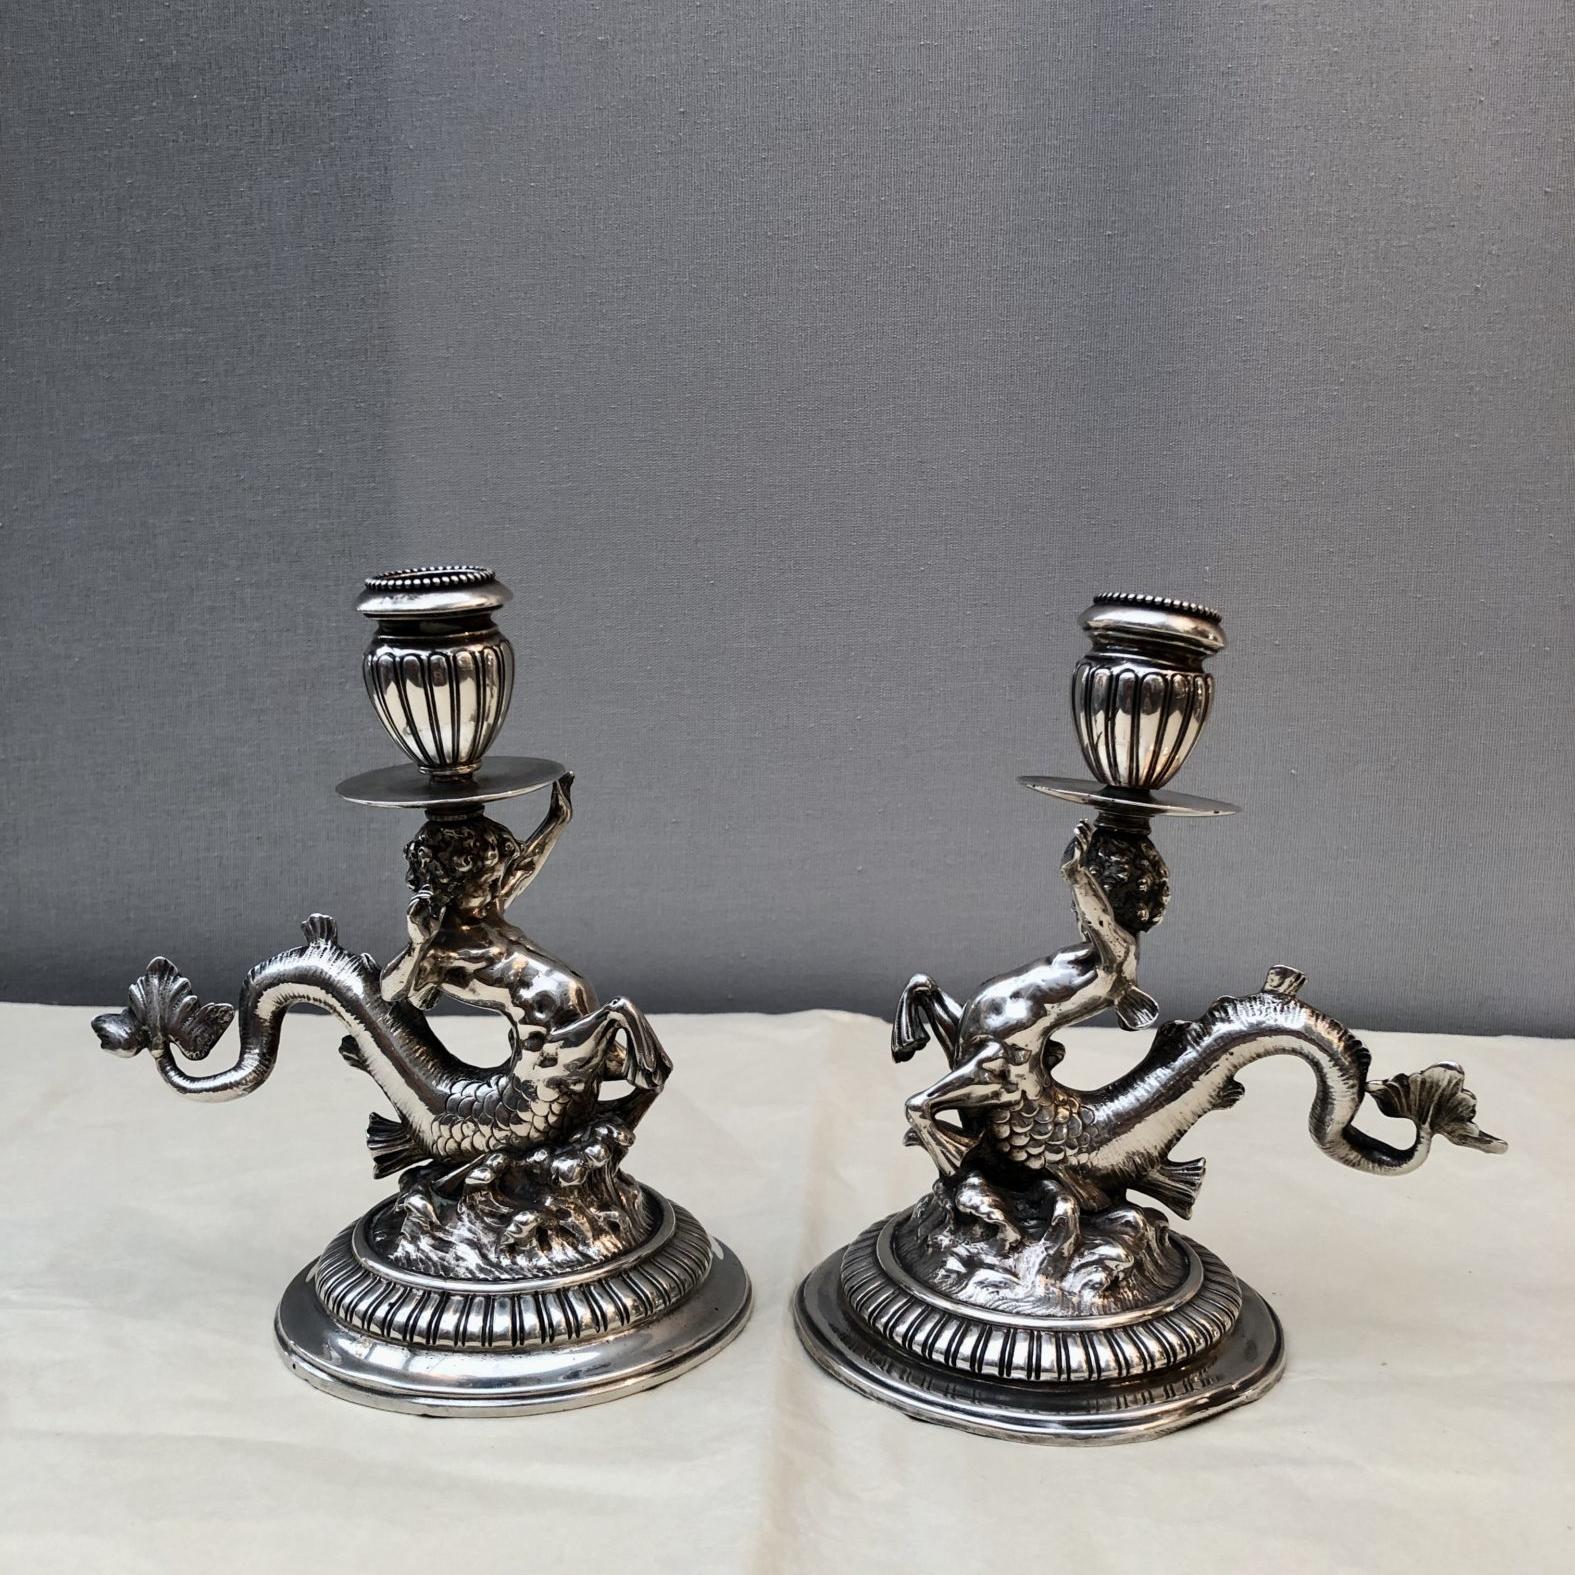 Pair of solid silver candlesticks, 19th century